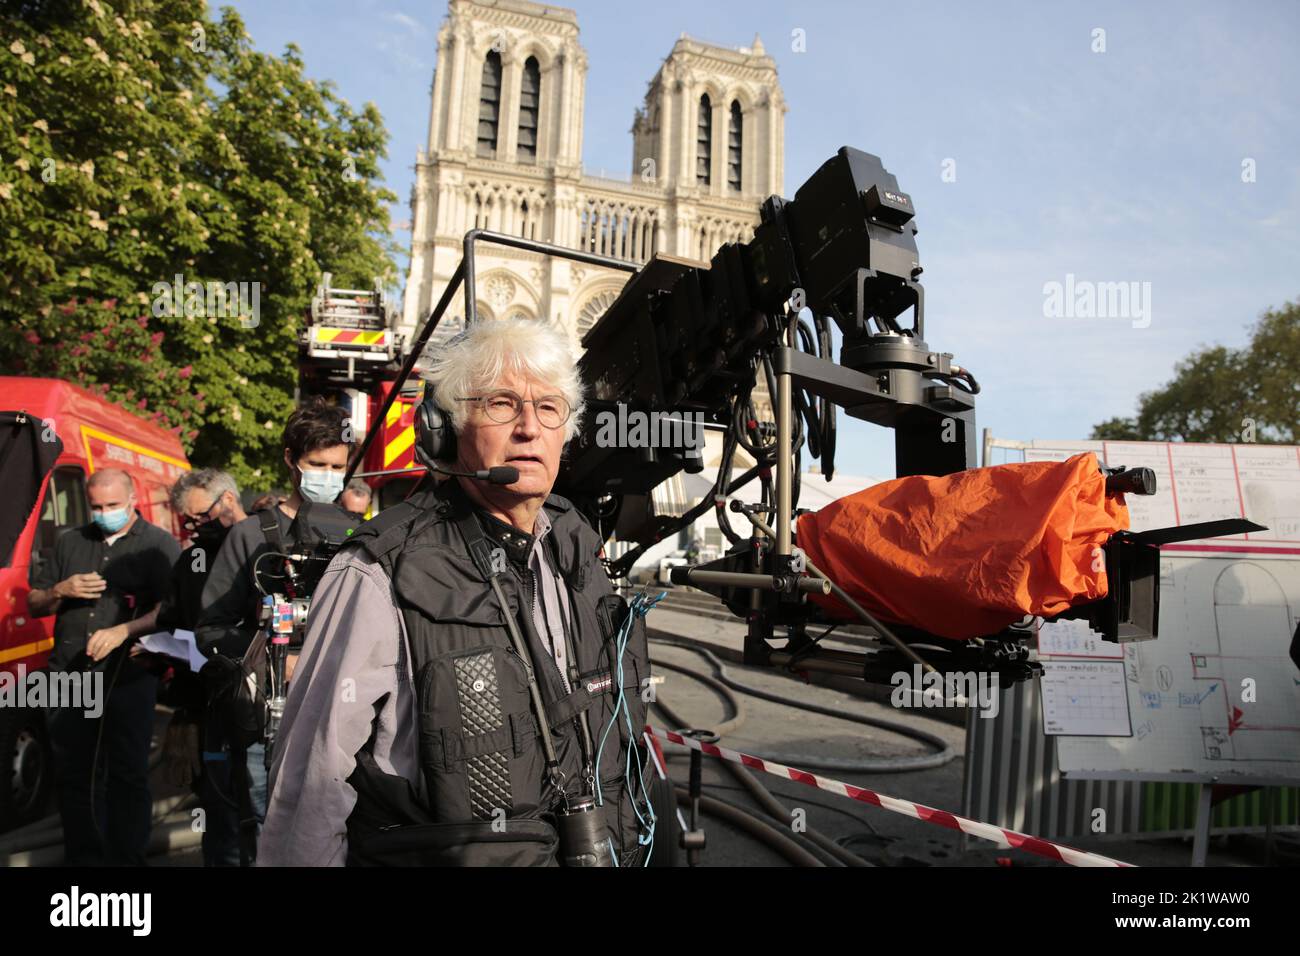 RELEASE DATE: July 22, 2022. TITLE: Notre-Dame on Fire. STUDIO: Pathe. DIRECTOR: Jean-Jacques Annaud. PLOT: A film relating from the inside the Notre-Dame de Paris fire of April 2019. STARRING: Director JEAN-JACQUES ANNAUD. (Credit Image: © Pathe/Entertainment Pictures) Stock Photo